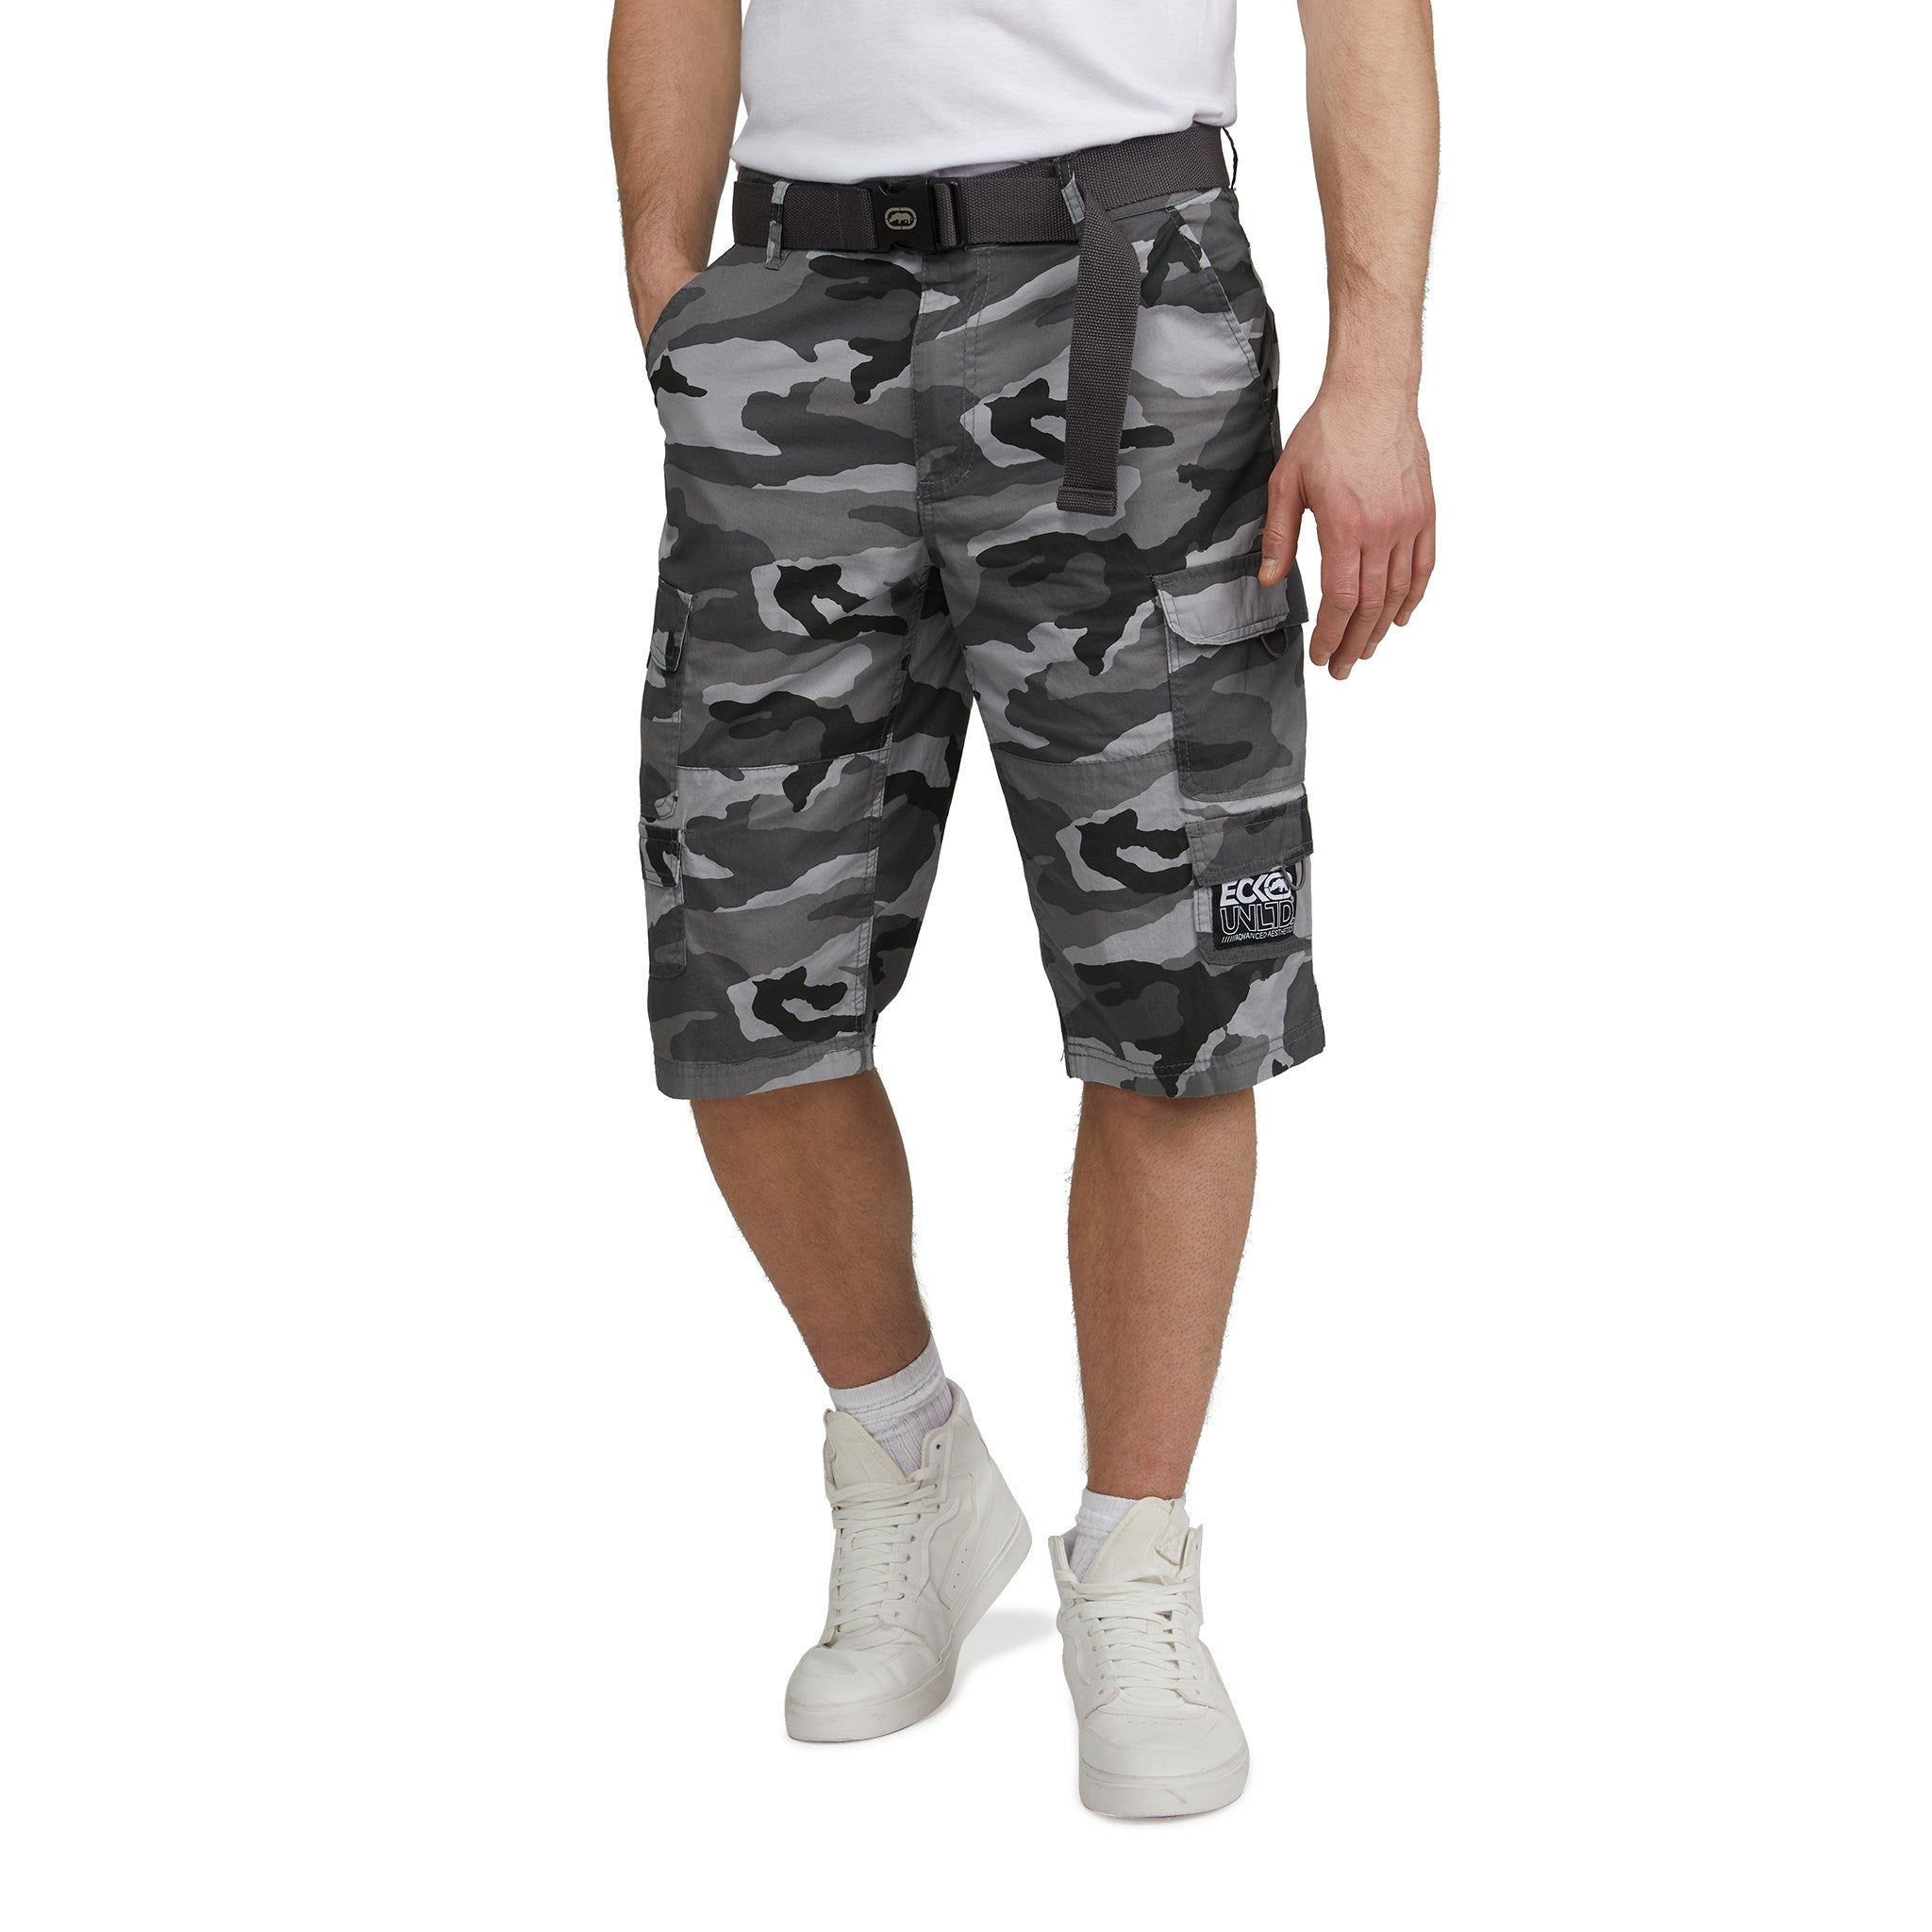 Looking for good cargo pants and shorts : r/IndianFashionAddicts